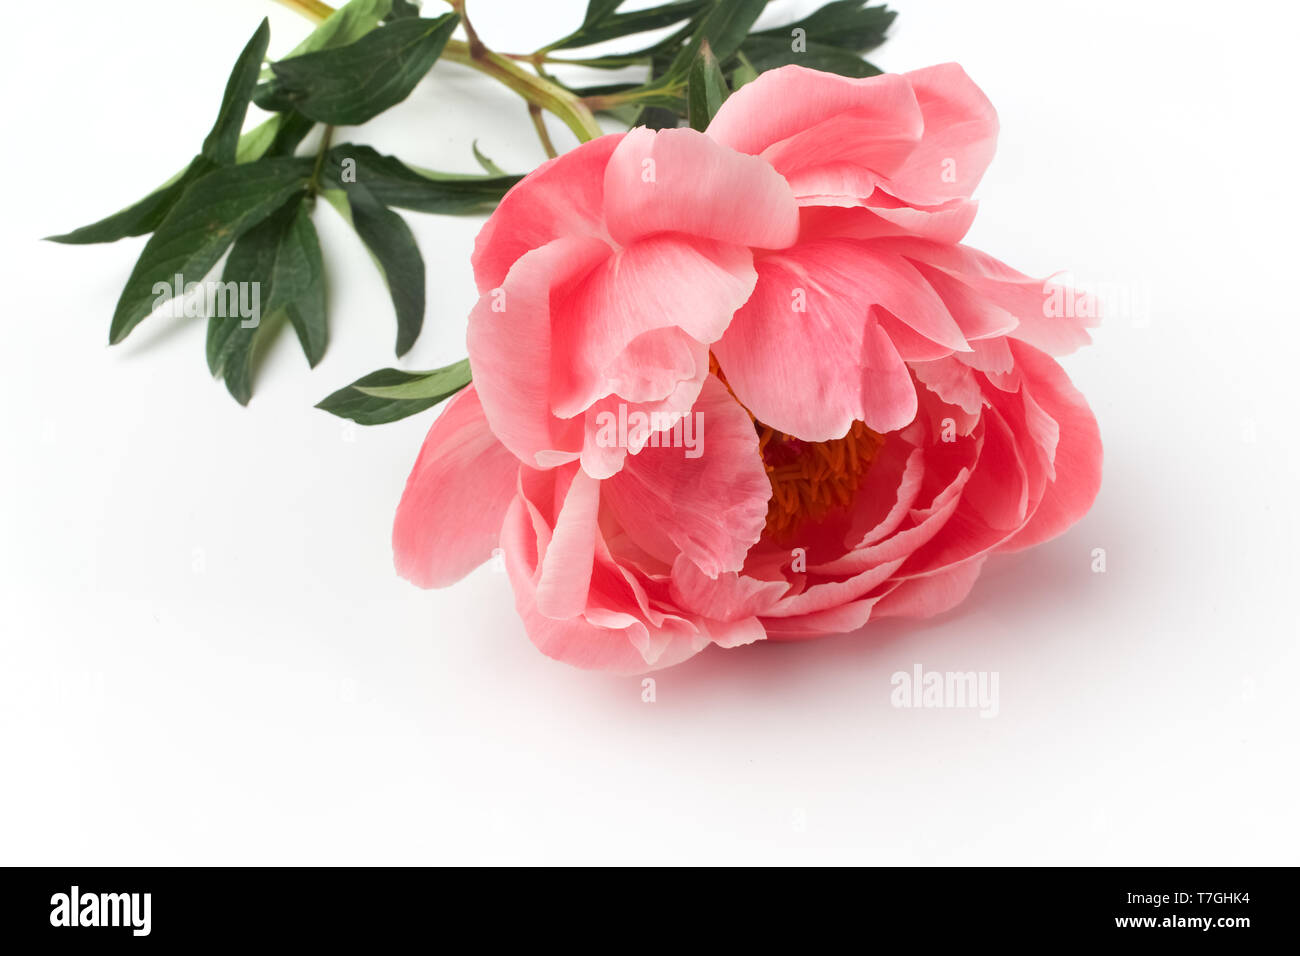 Pink peony on white background. Birthday, Mother's, Valentines, Women's Wedding Day concept. Greeting card. Stock Photo